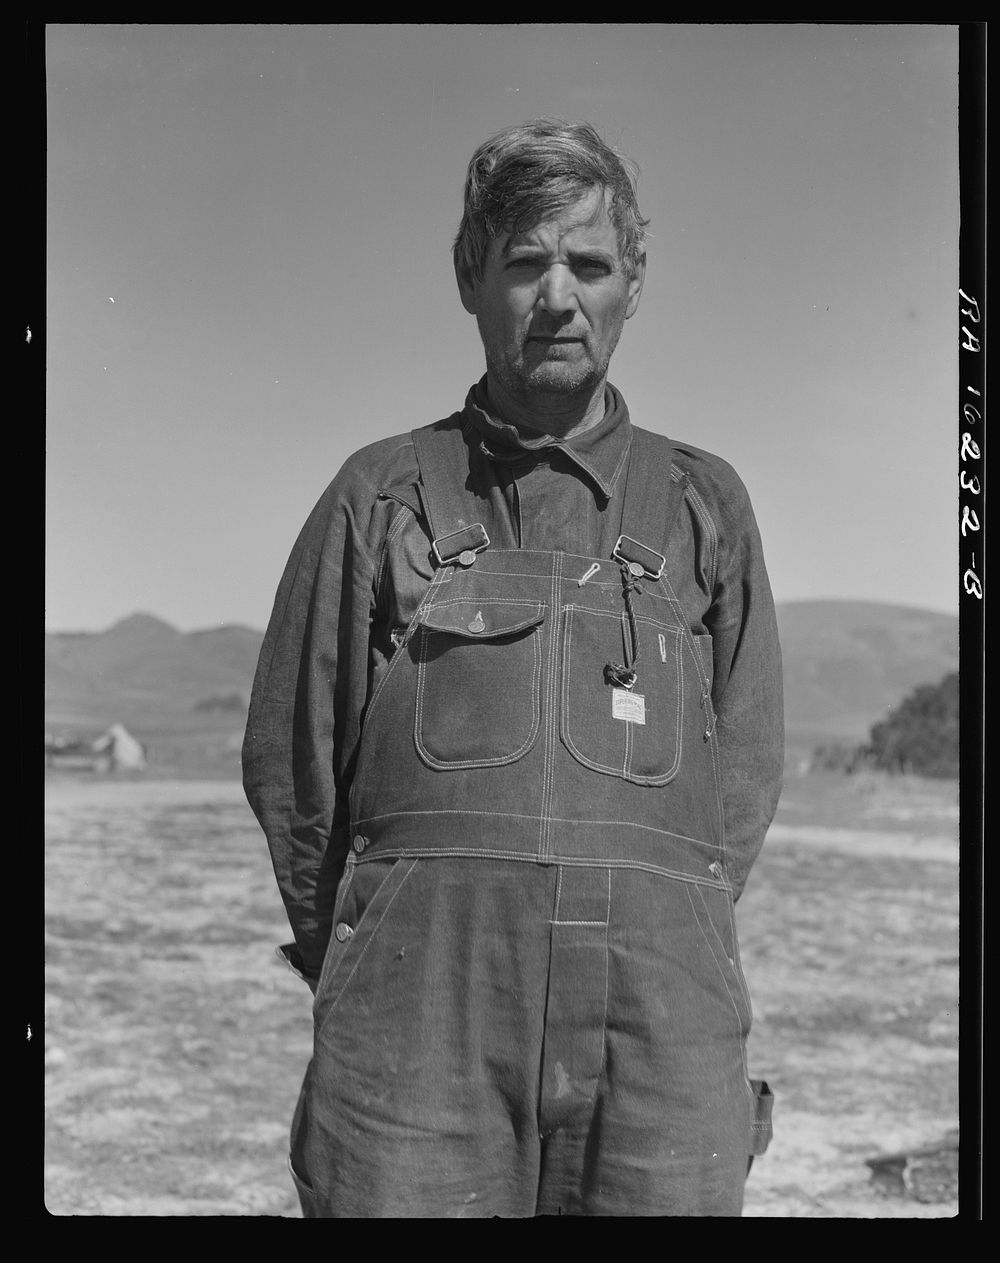 A former tenant farmer from Texas now working in California as a pea picker. Nipomo, California. Sourced from the Library of…